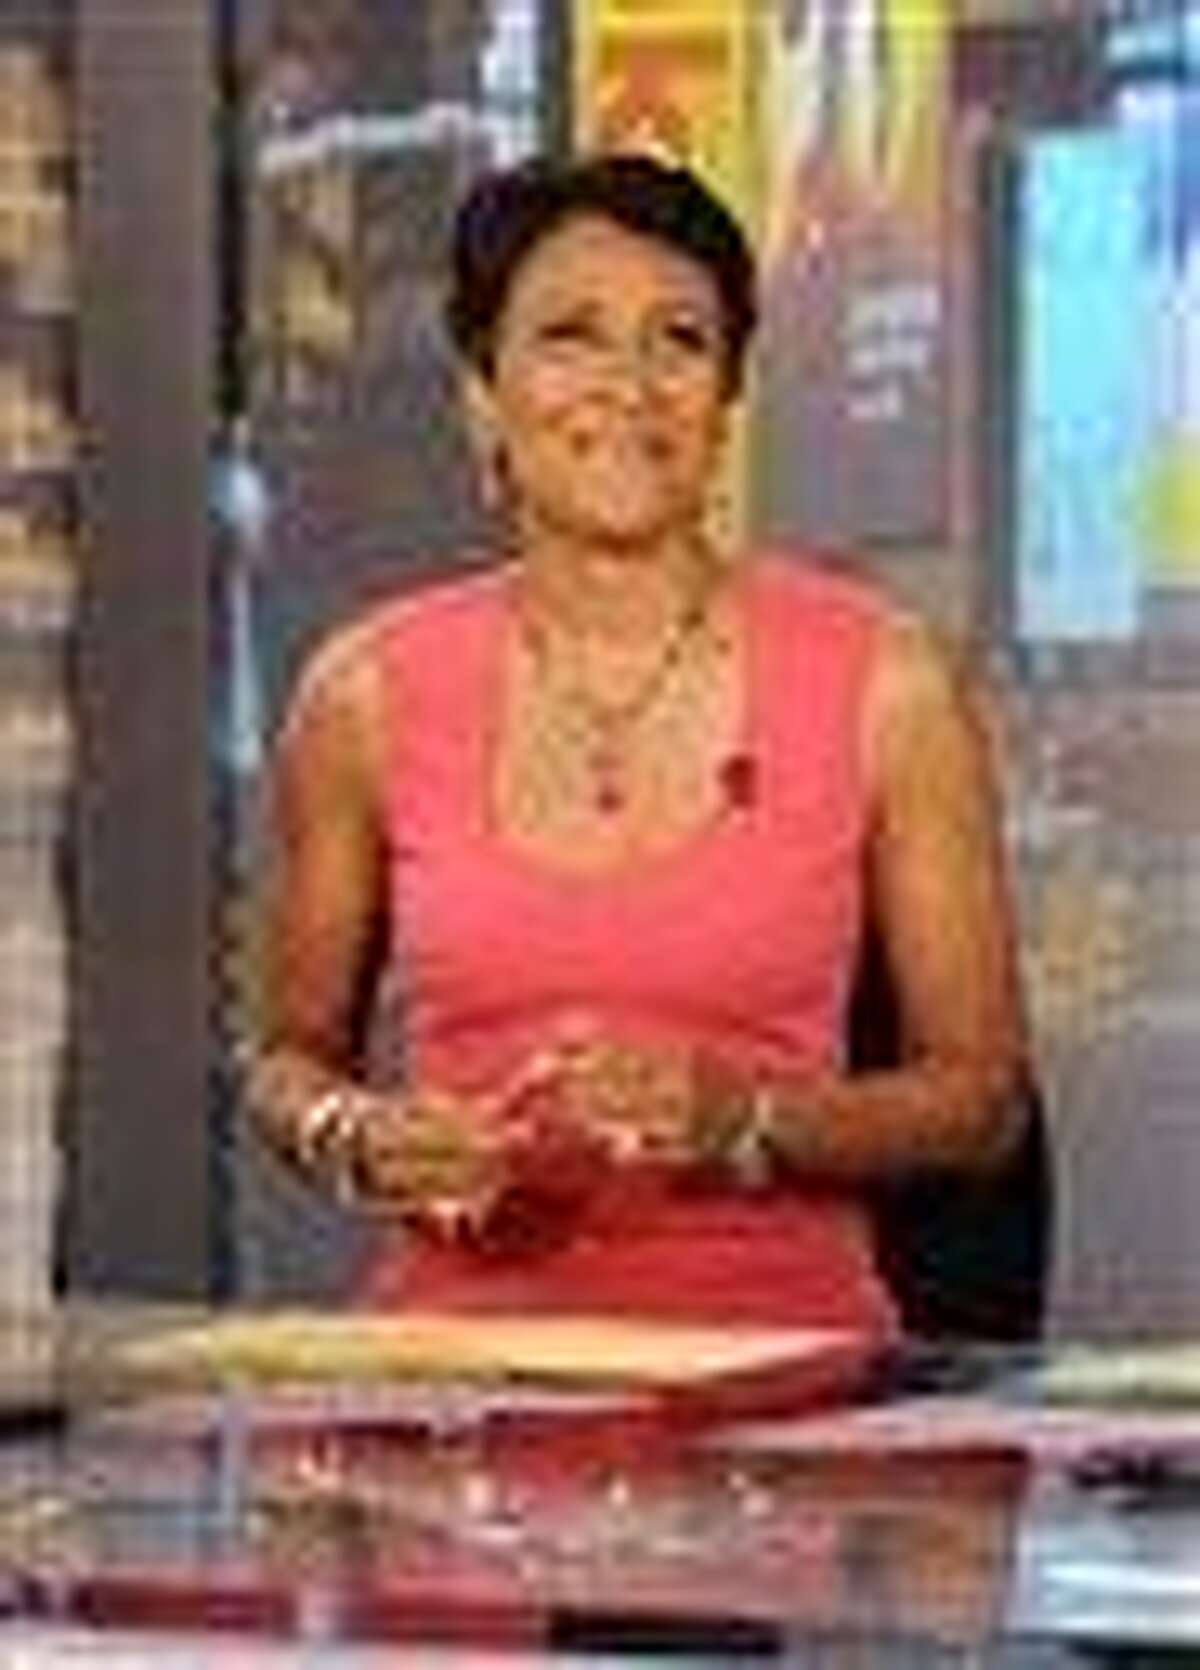 On Monday's edition Good Morning America, Robin Roberts made official the start date for what's being called her "extended medical leave." Associated Press photo